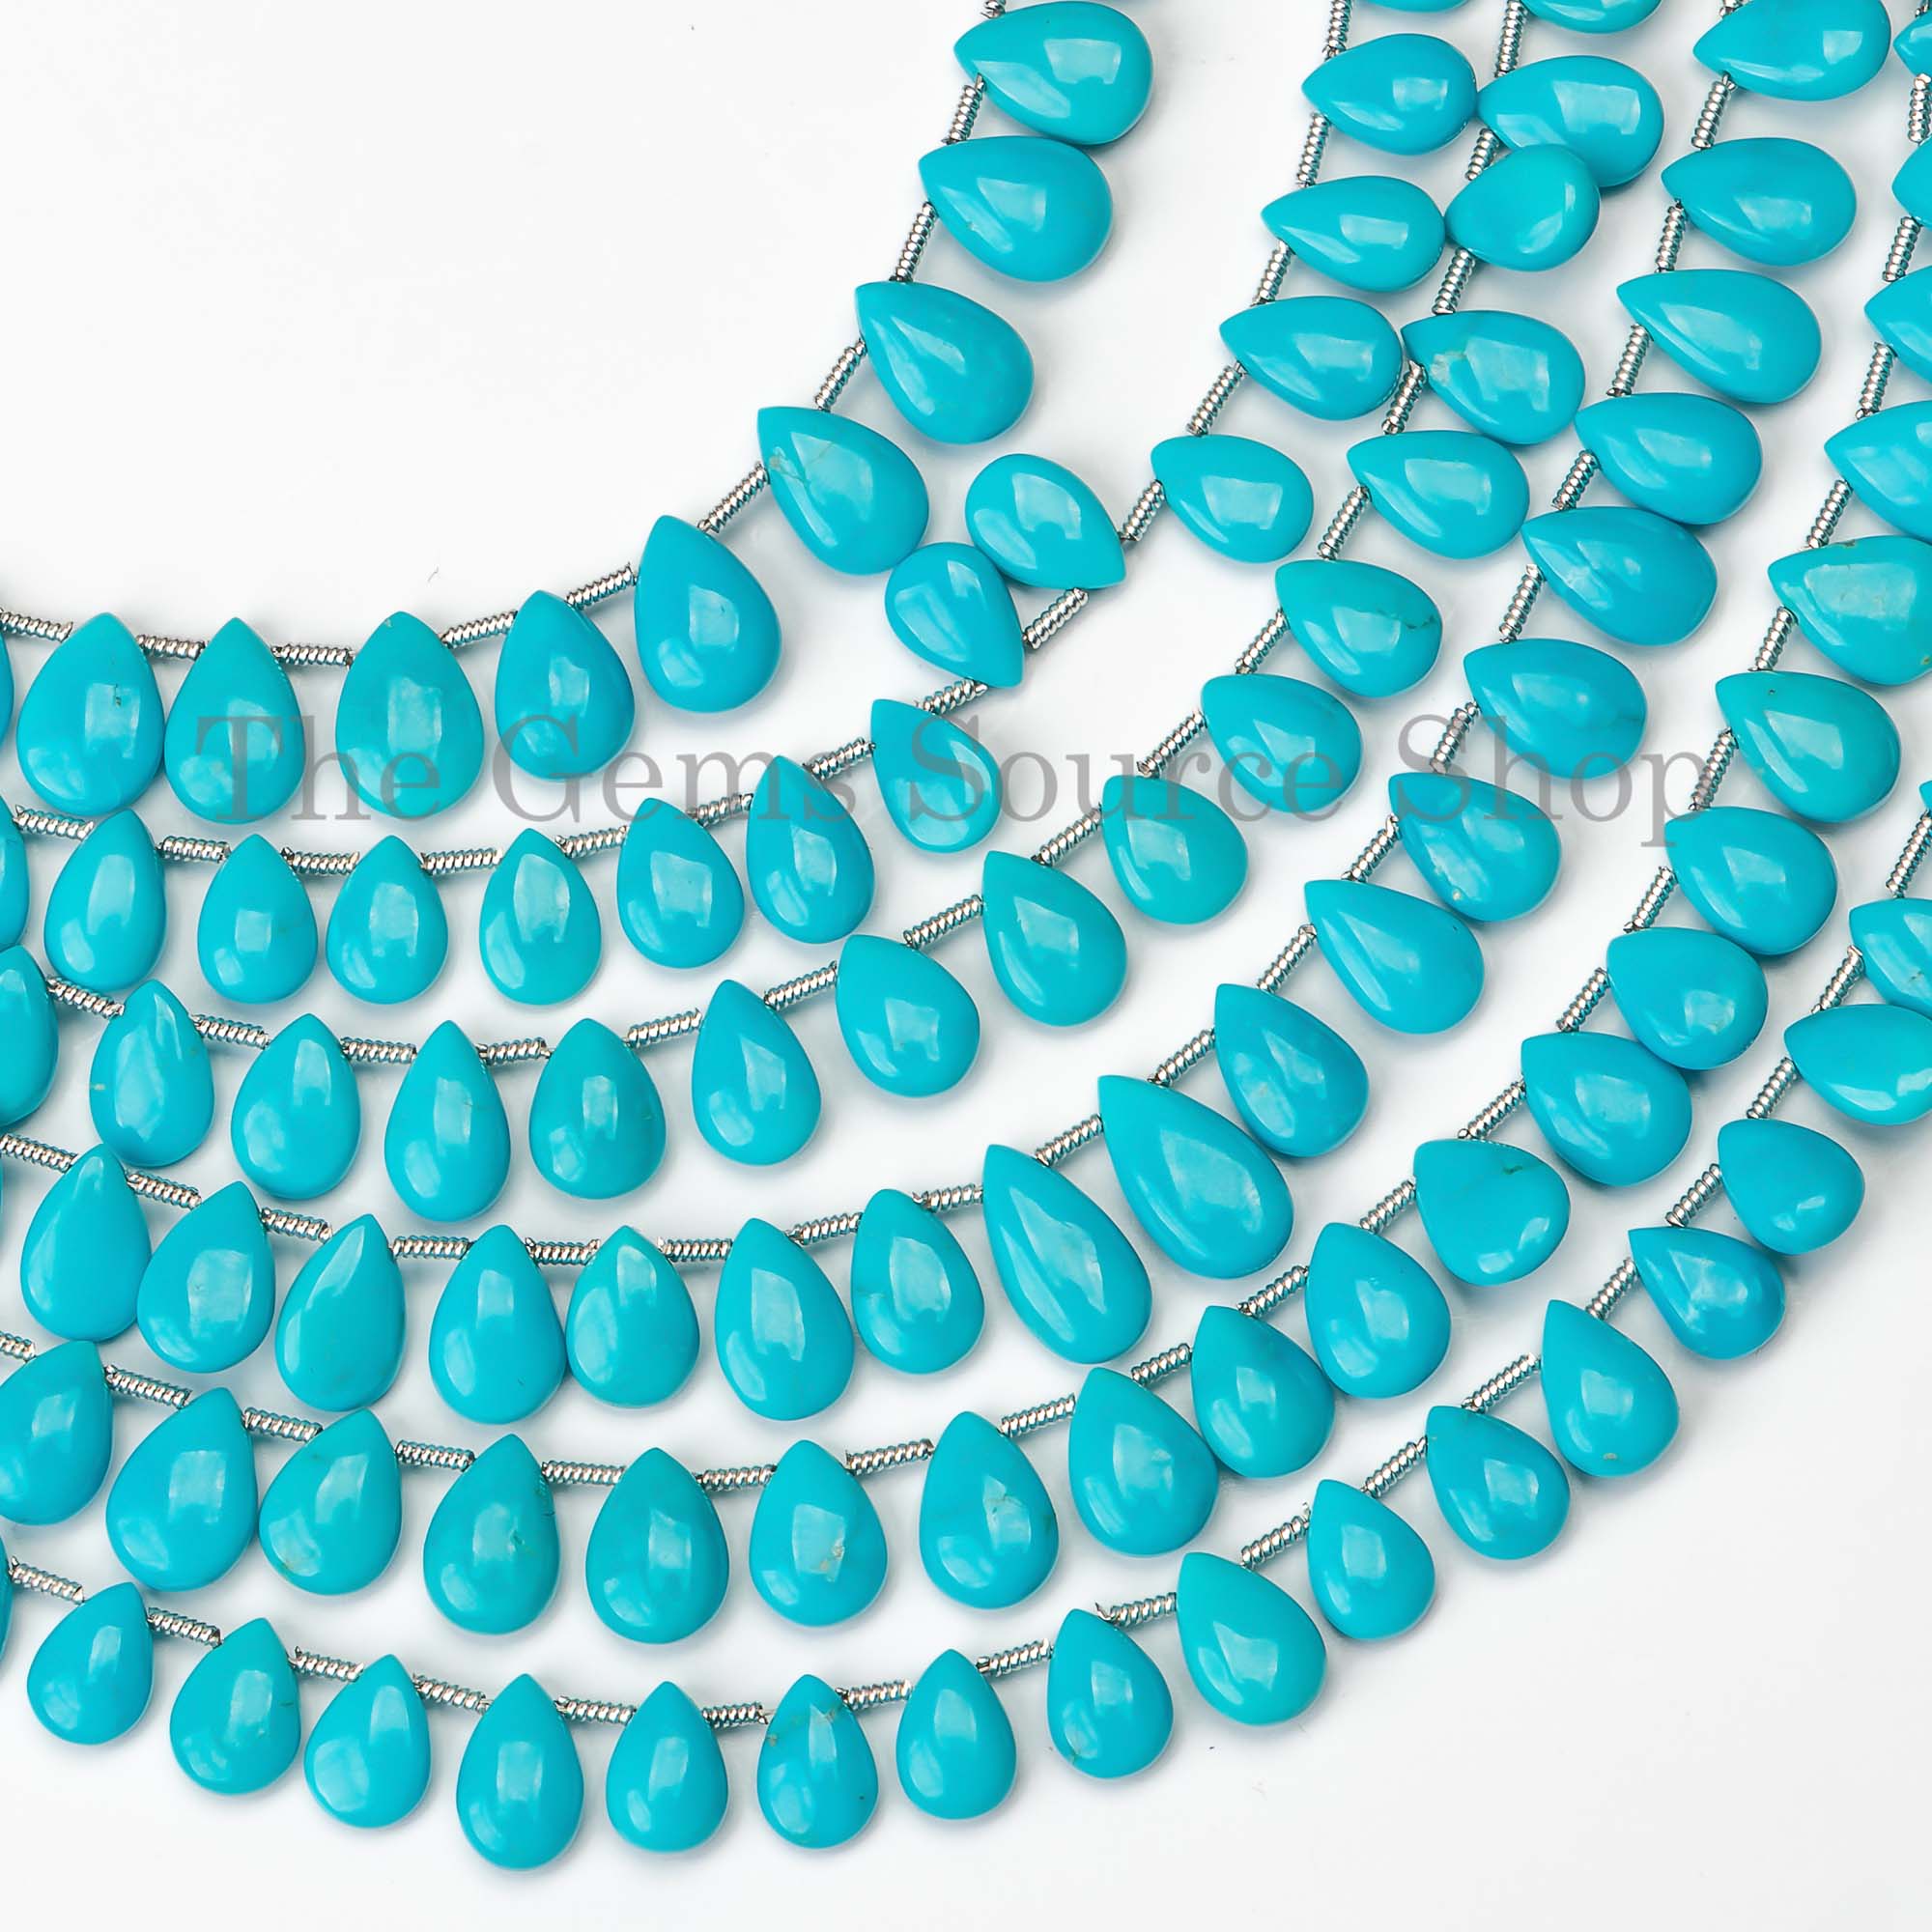 Sleeping Beauty Turquoise Smooth Pear Briolettes, Wholesale Beads